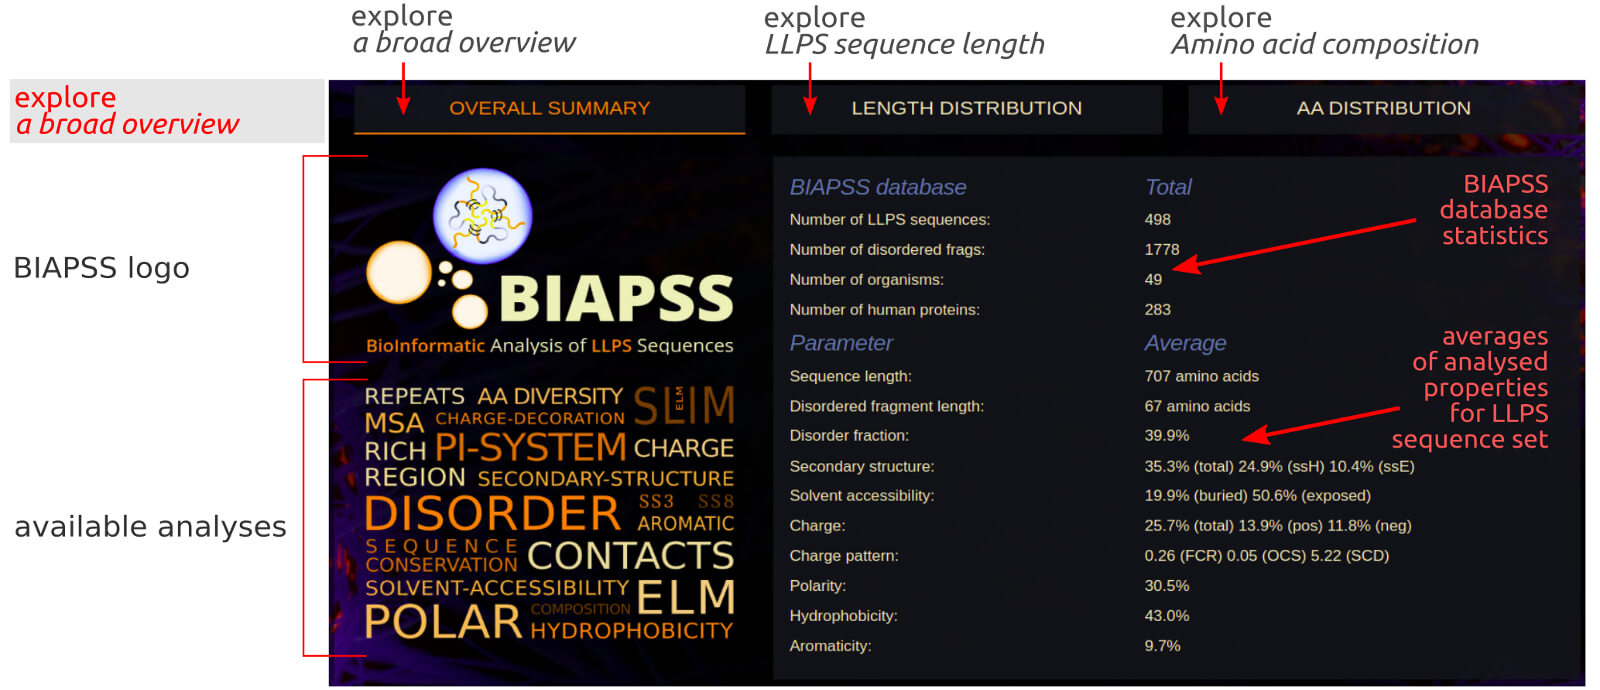 BIAPSS - Overall Summary on LLPS Sequence Set.